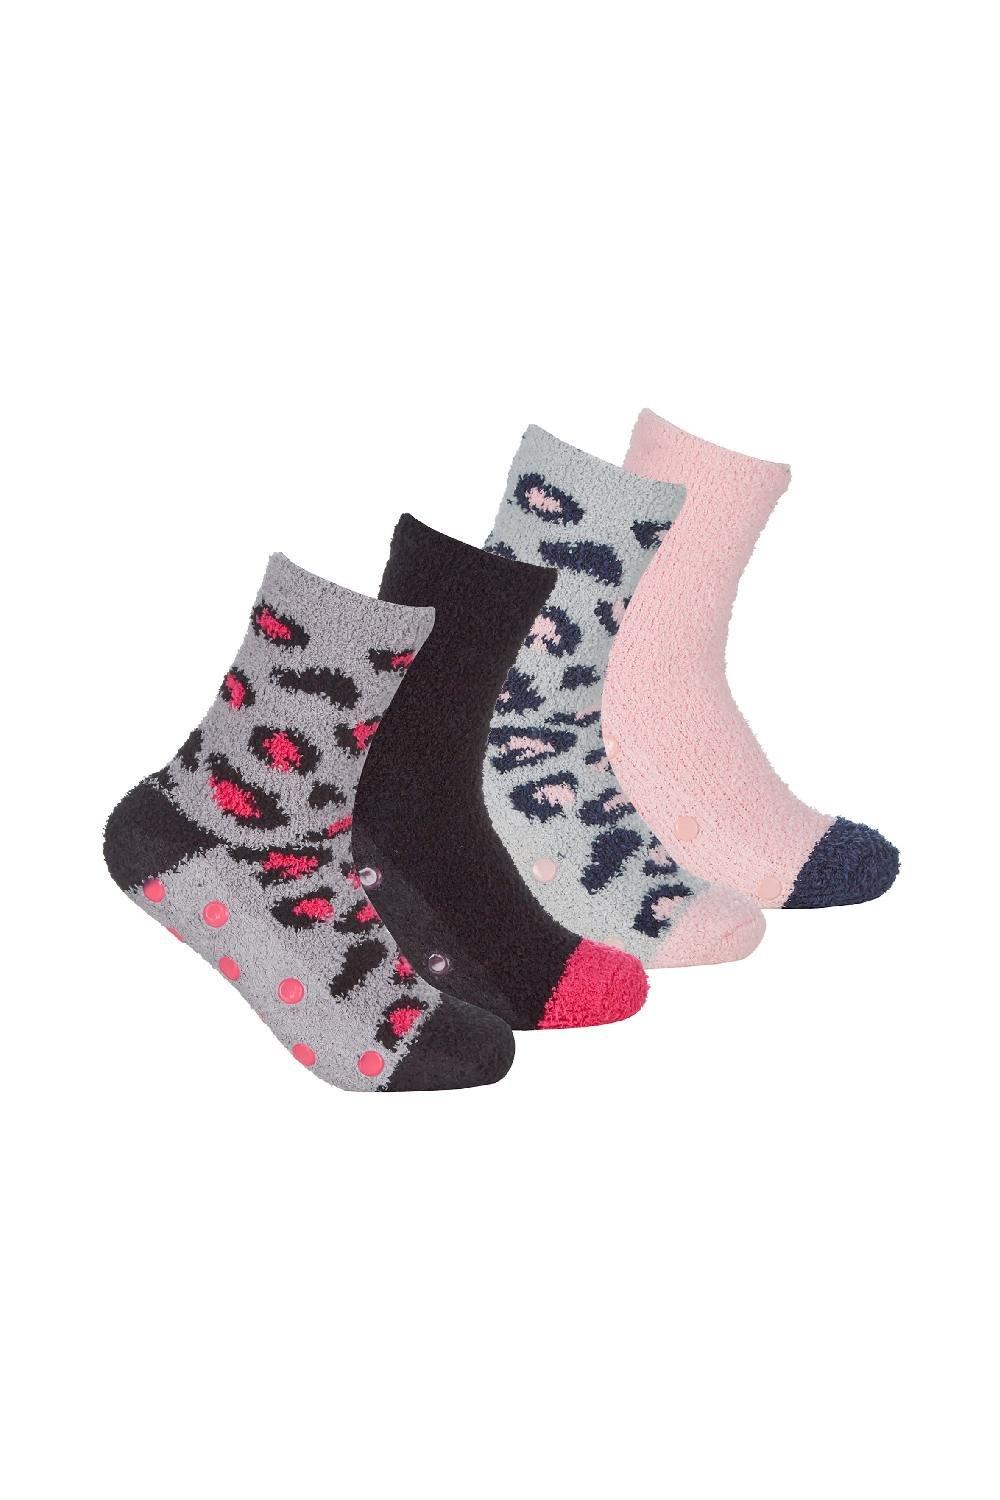 4 Pair Thermal Indoor Fuzzy Anti Slip Cosy Bed Socks with Grips